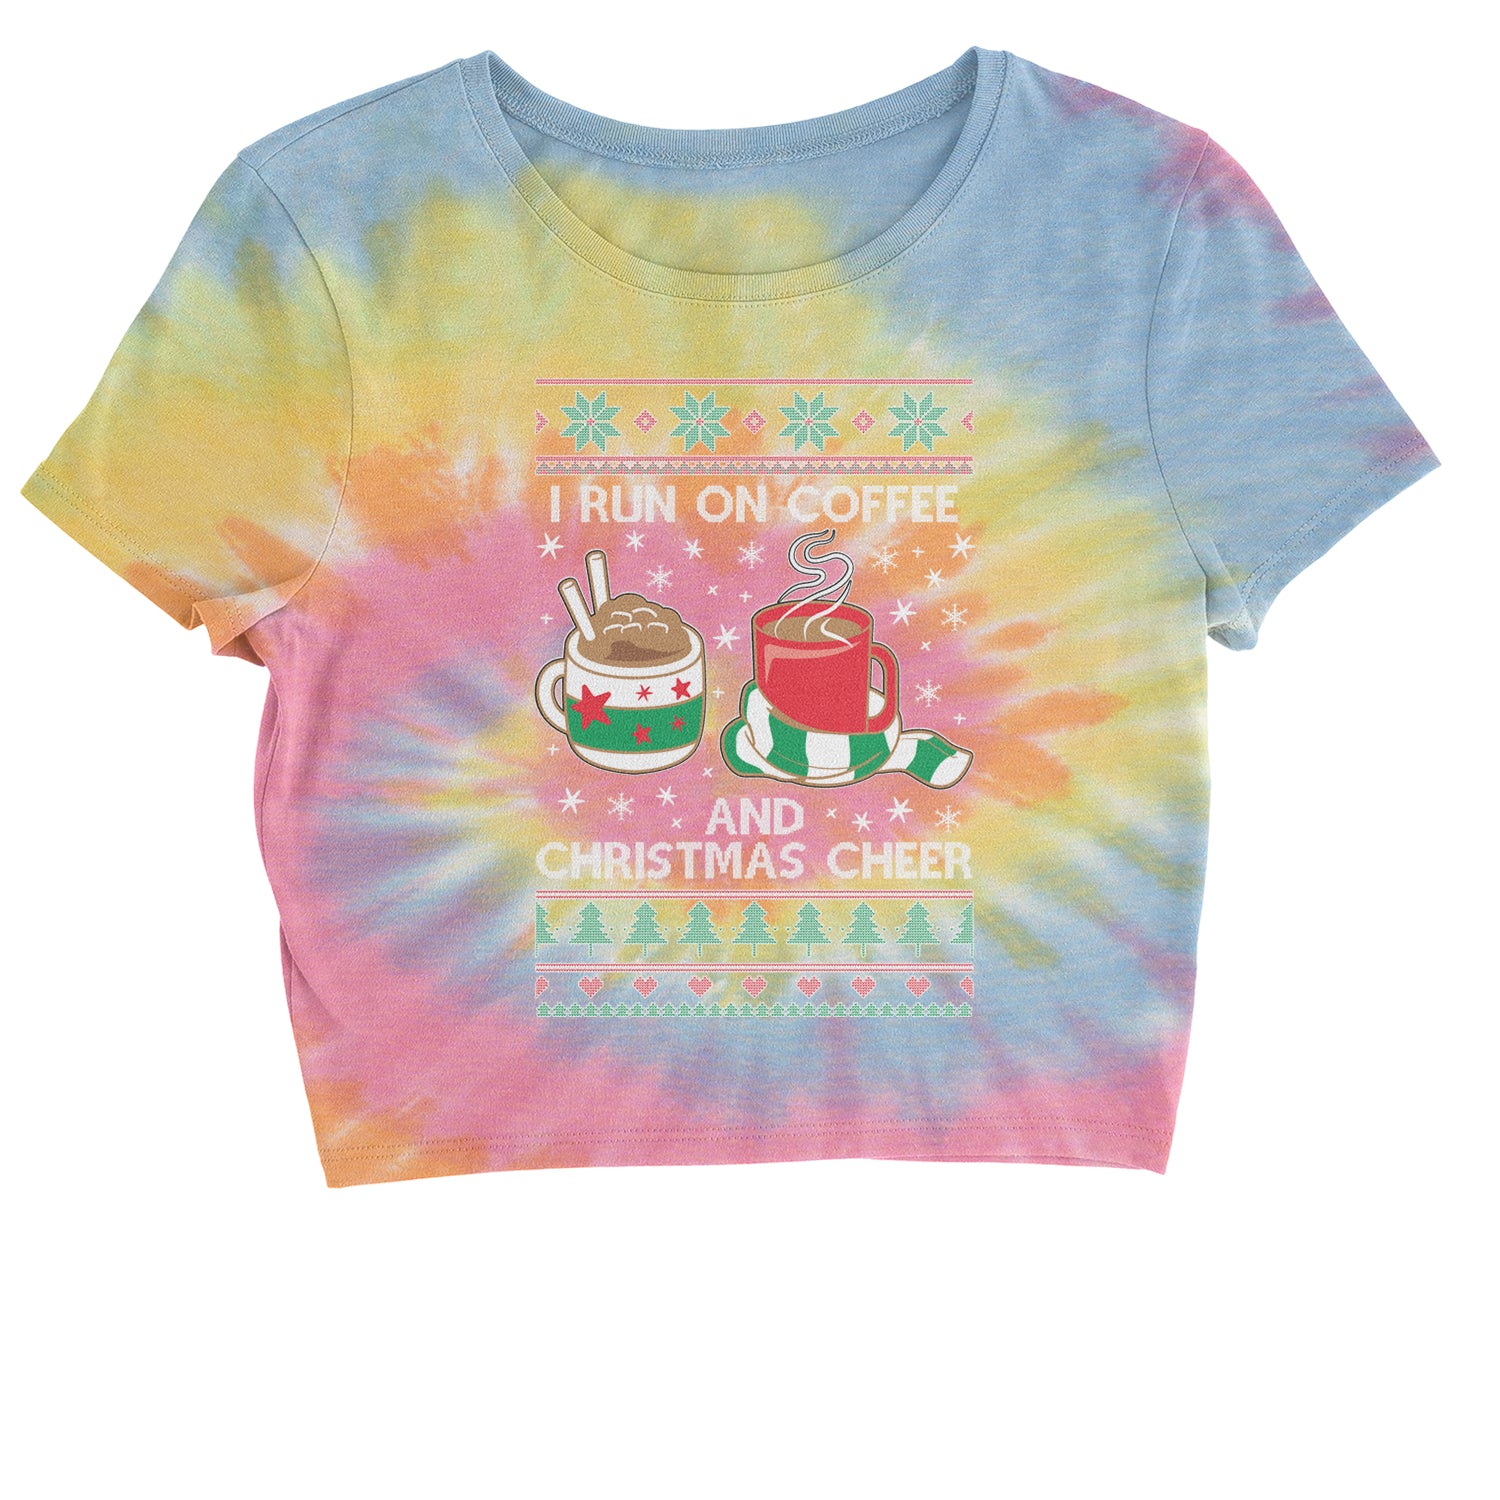 I Run On Coffee And Christmas Cheer Cropped T-Shirt christmas, sweater, sweatshirt, ugly by Expression Tees